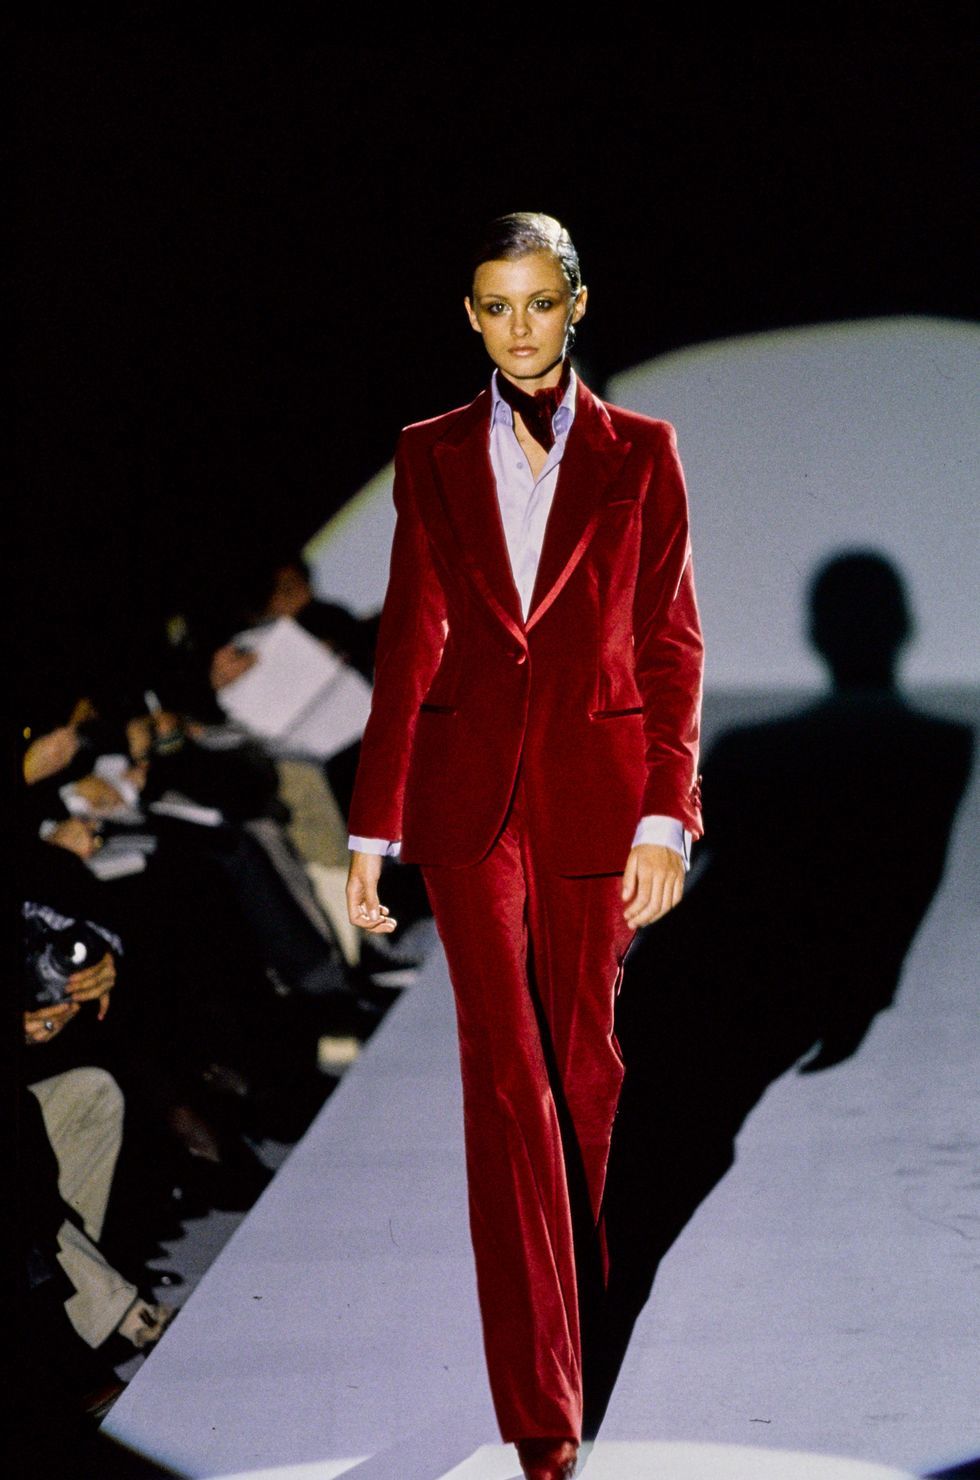 Gucci Gwyneth Paltrow Iconic Red Velvet Suit Fall 2021